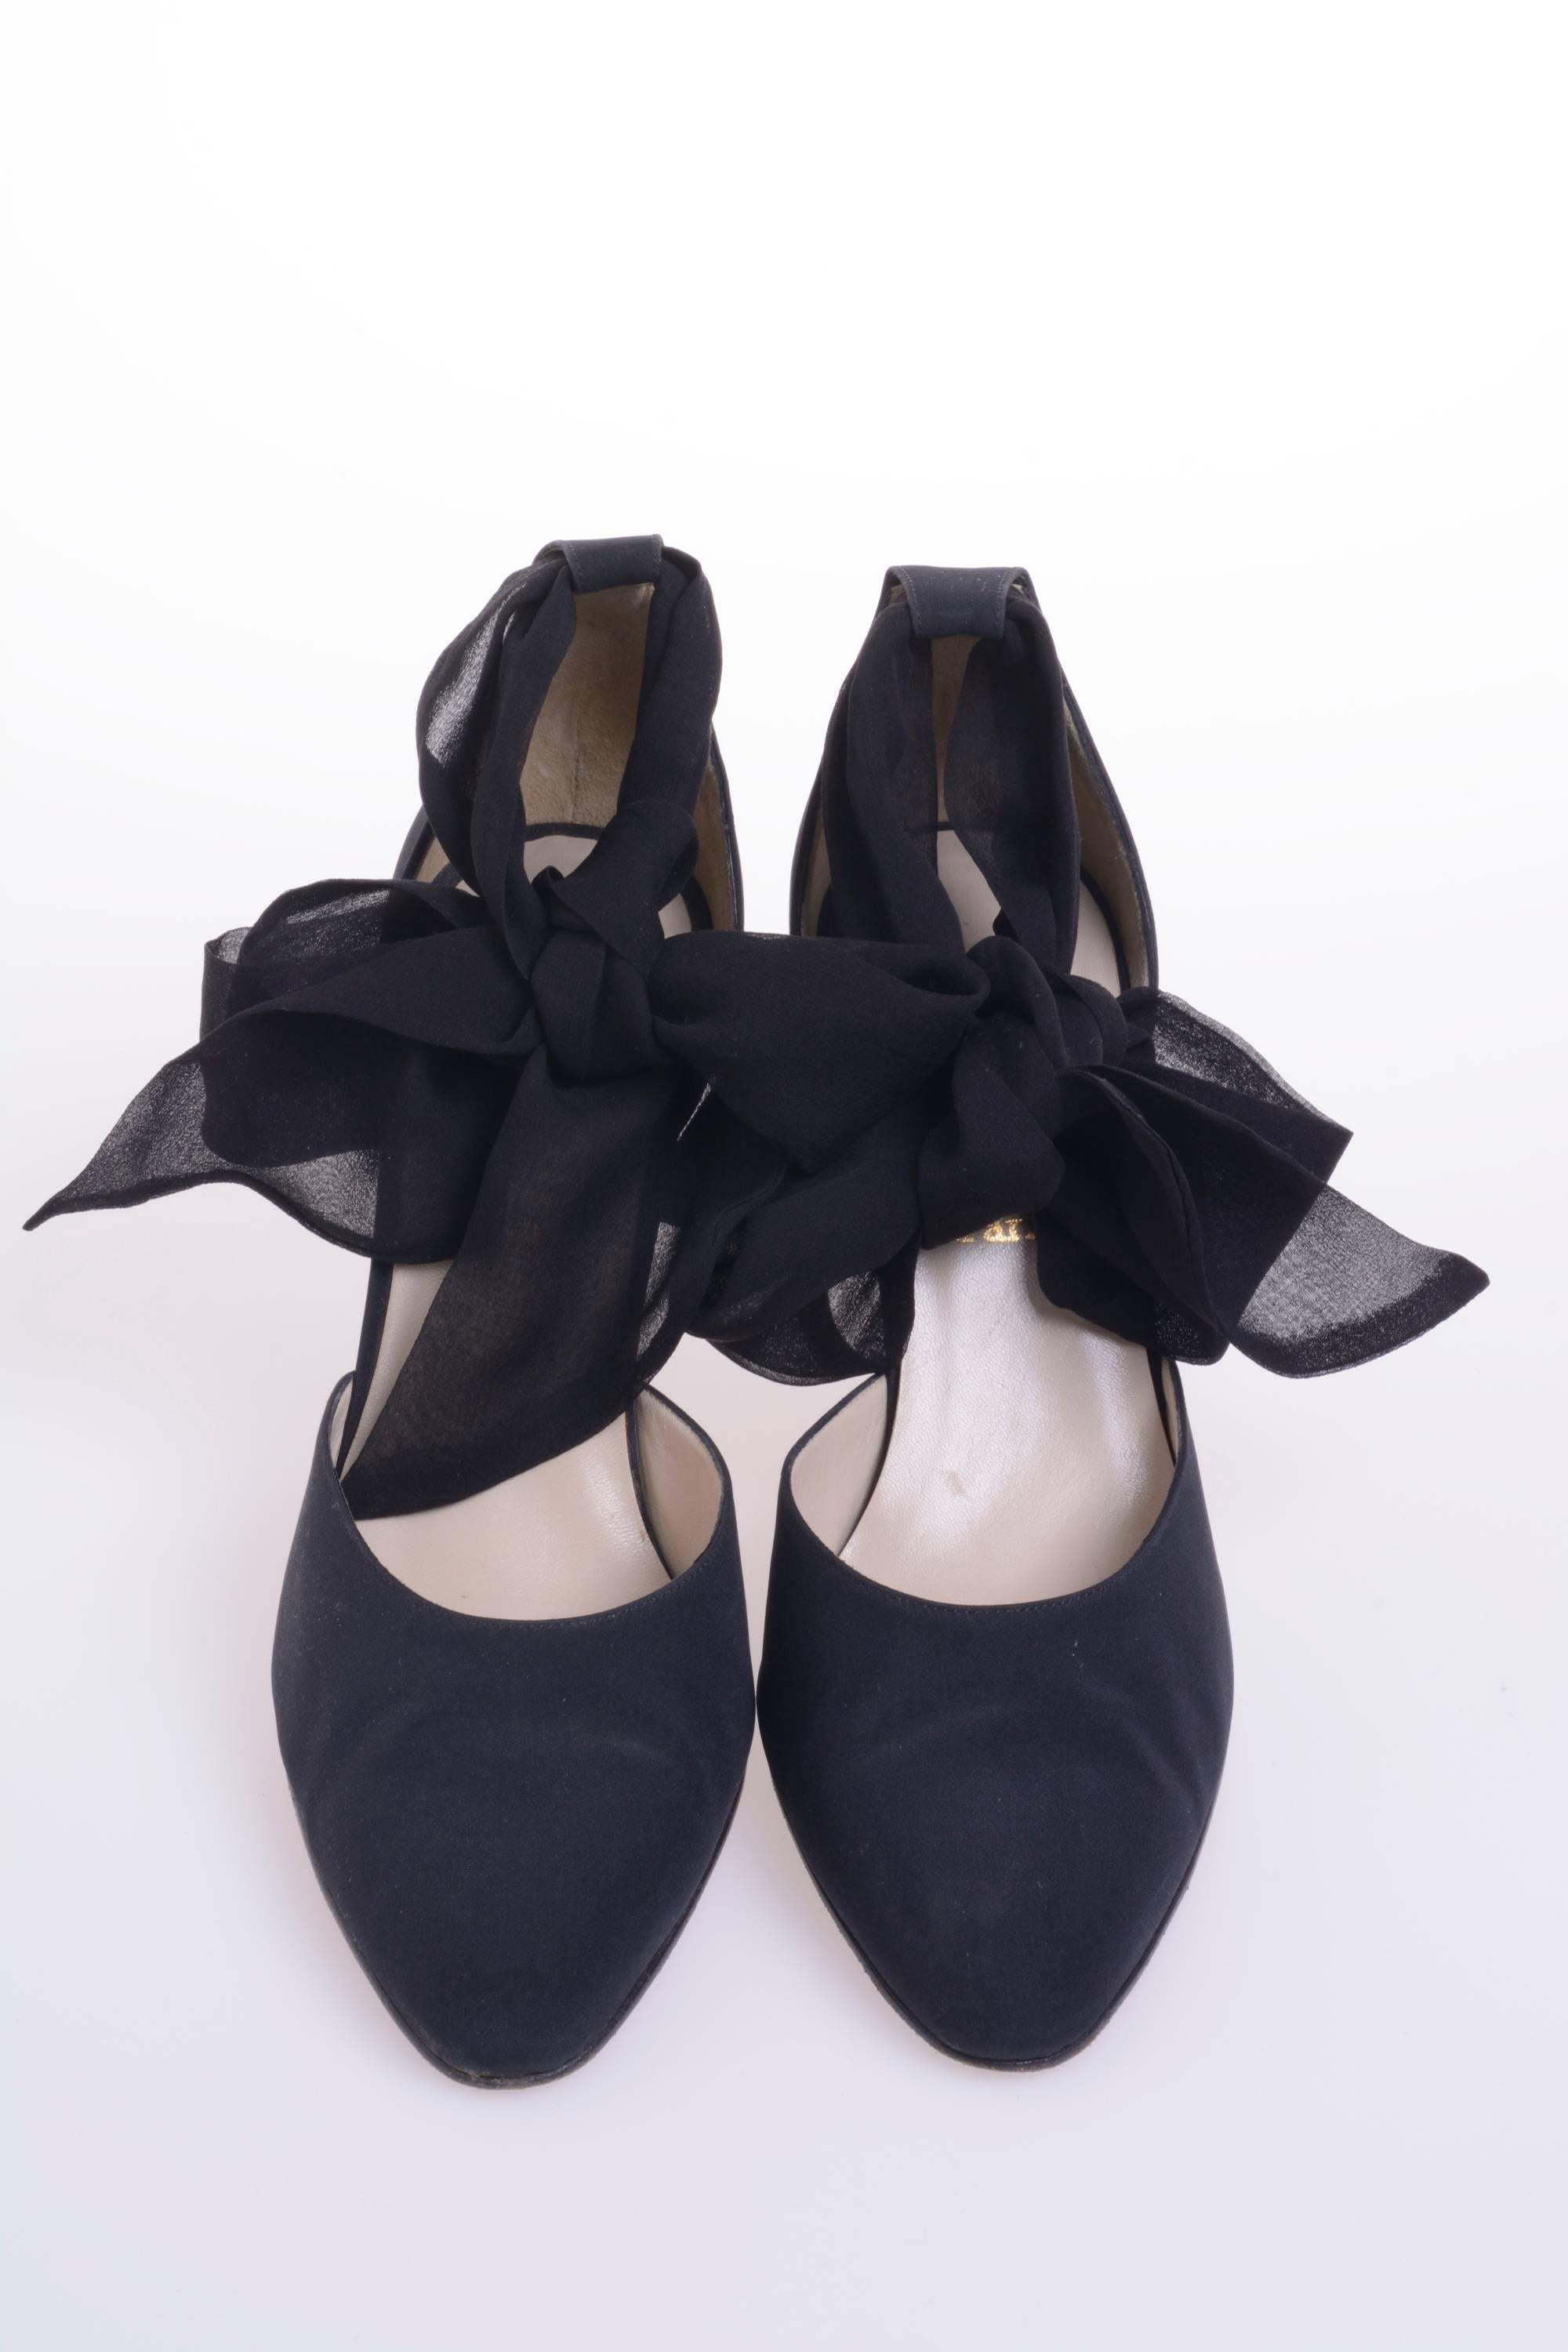 CHRISTIAN LOUBOUTIN Douce Du Desert black evening pointed shoes has nude leather lining and insole, french heel, red outsole, with a broad wrap-around ankle ties on Douce Du Desert; bring a sumptuous, organic feel made in black Crepe de Chine. Made